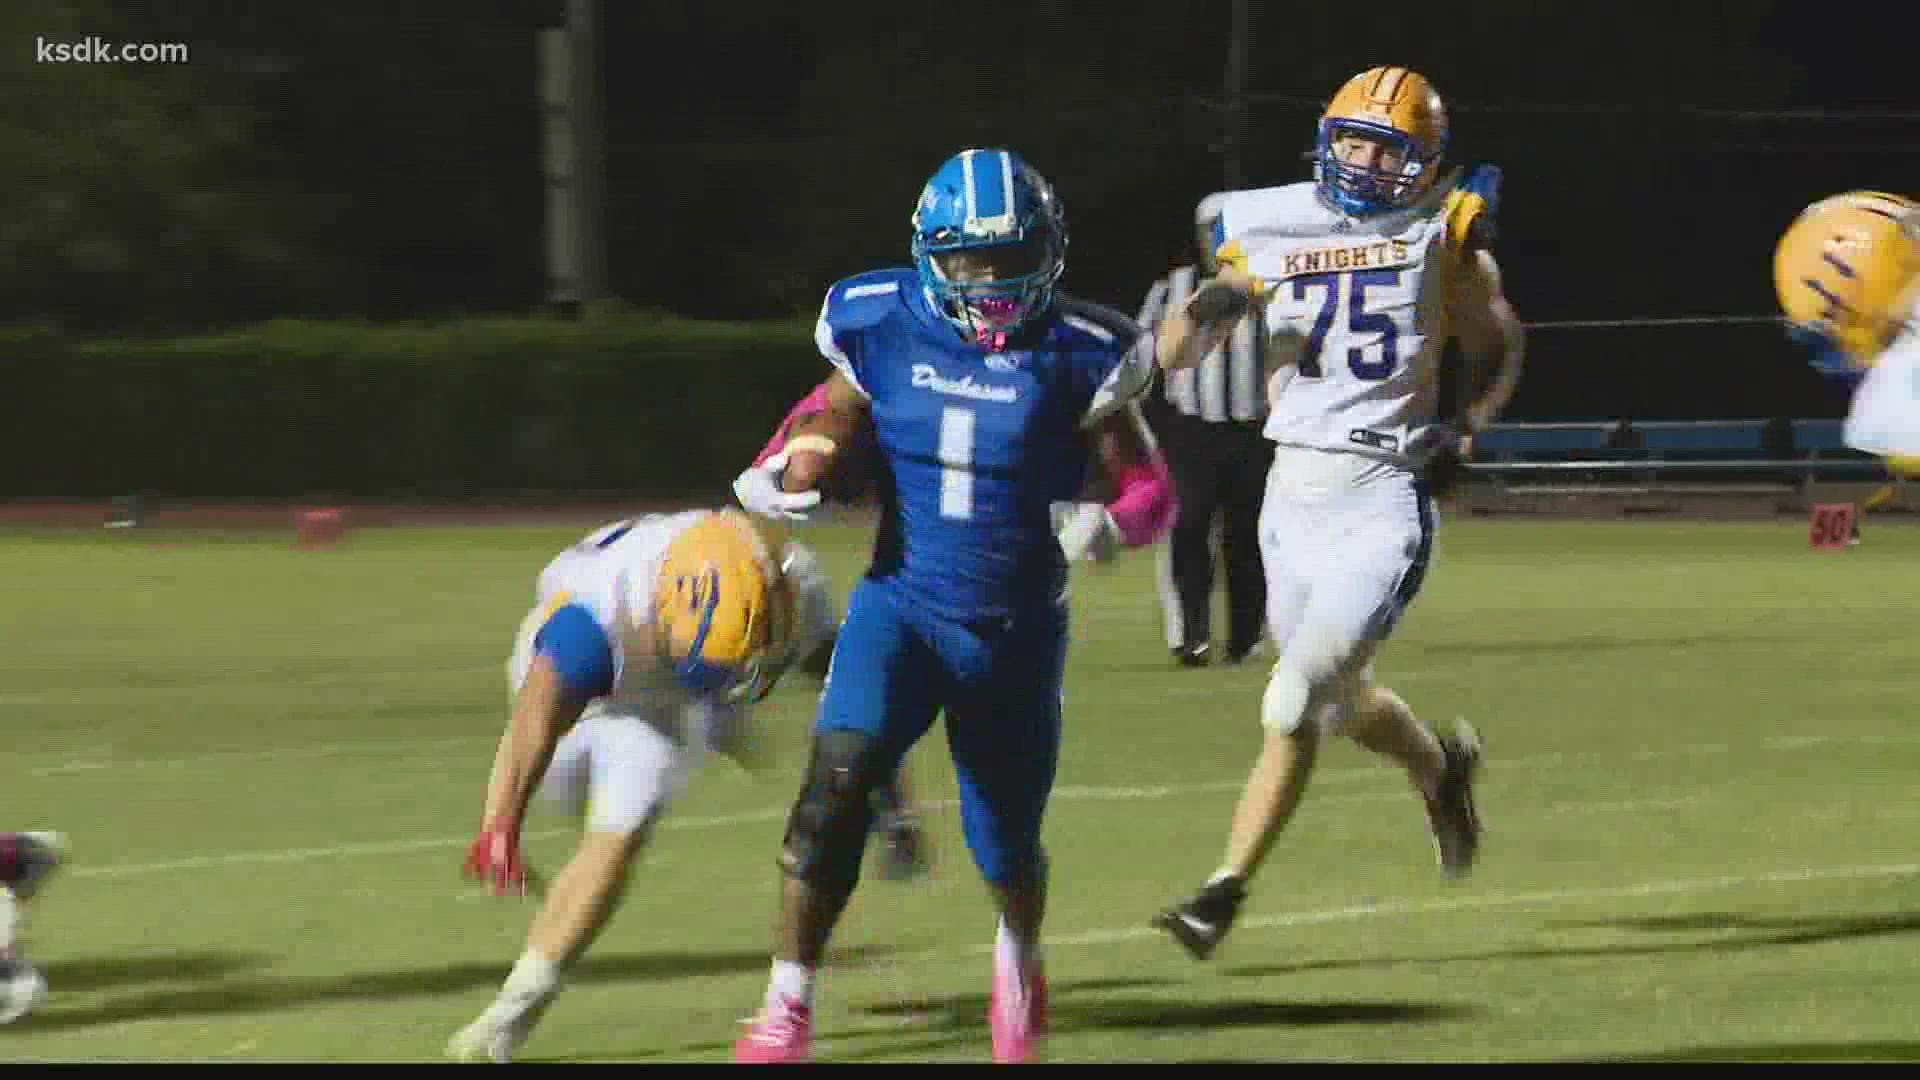 The Pioneers got the better of Borgia Friday night